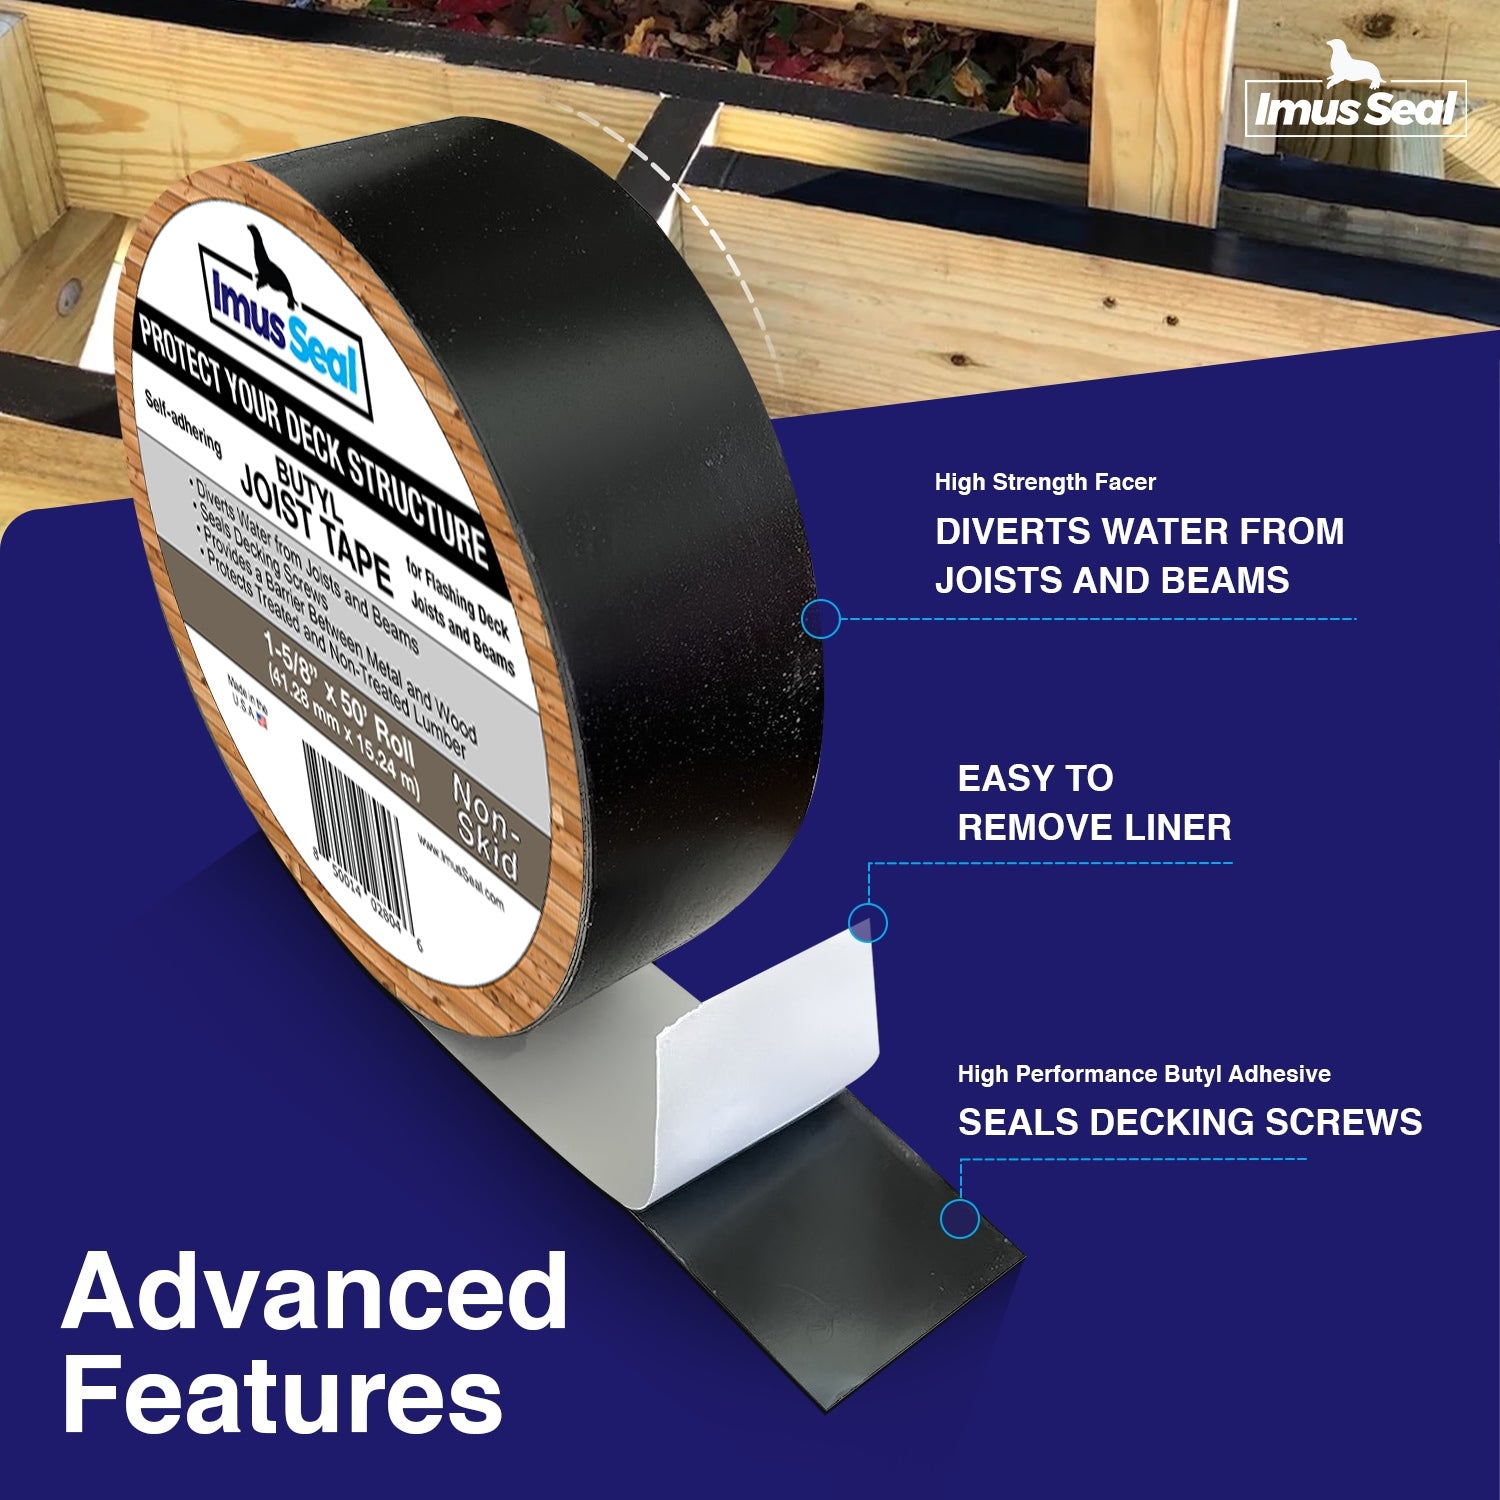 Imus Seal Butyl Joist Tape Non-Skid Features Infographic